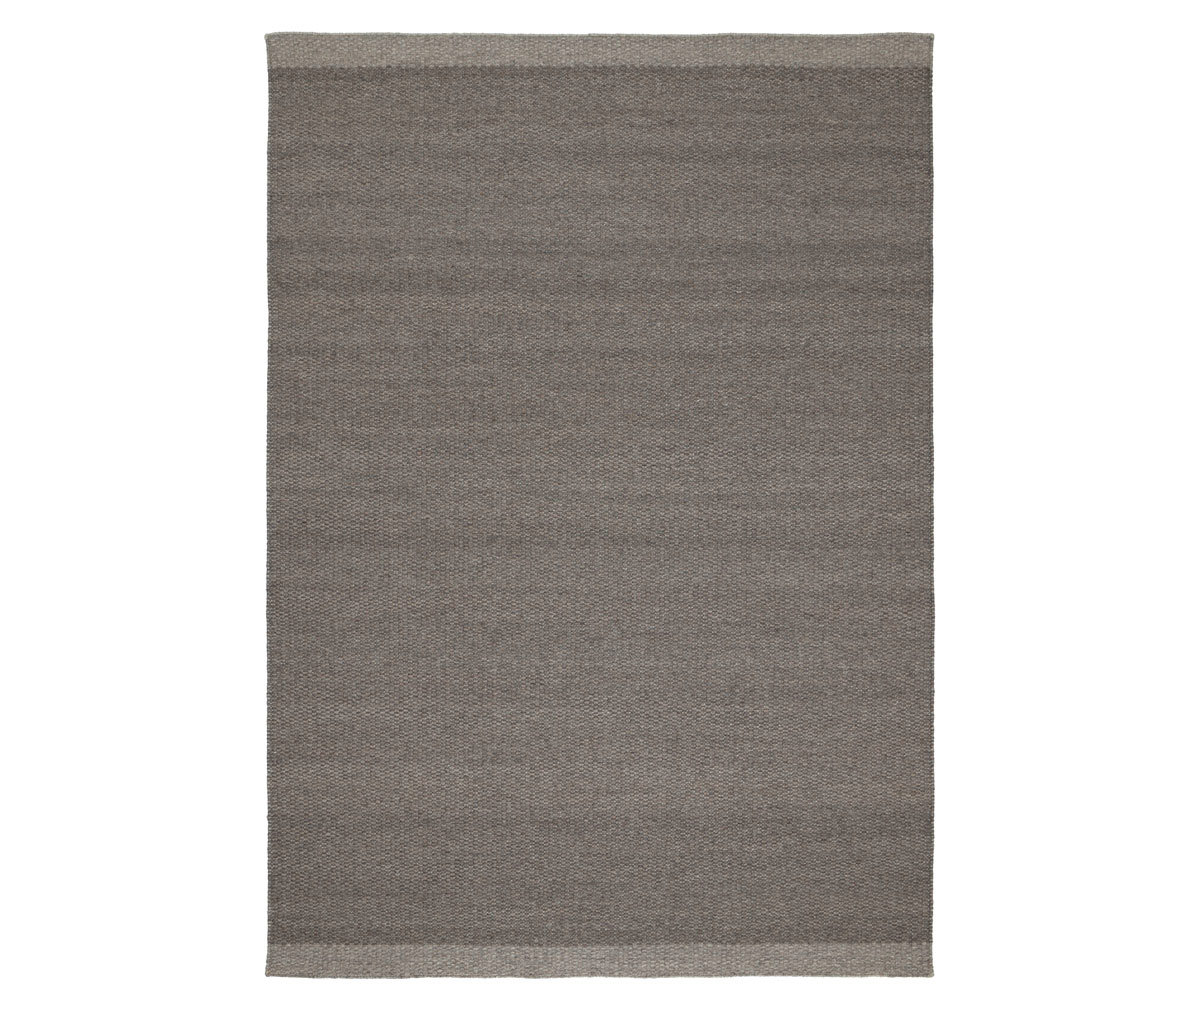 Linie Design Frode Rug Charcoal, 200 x 300 cm